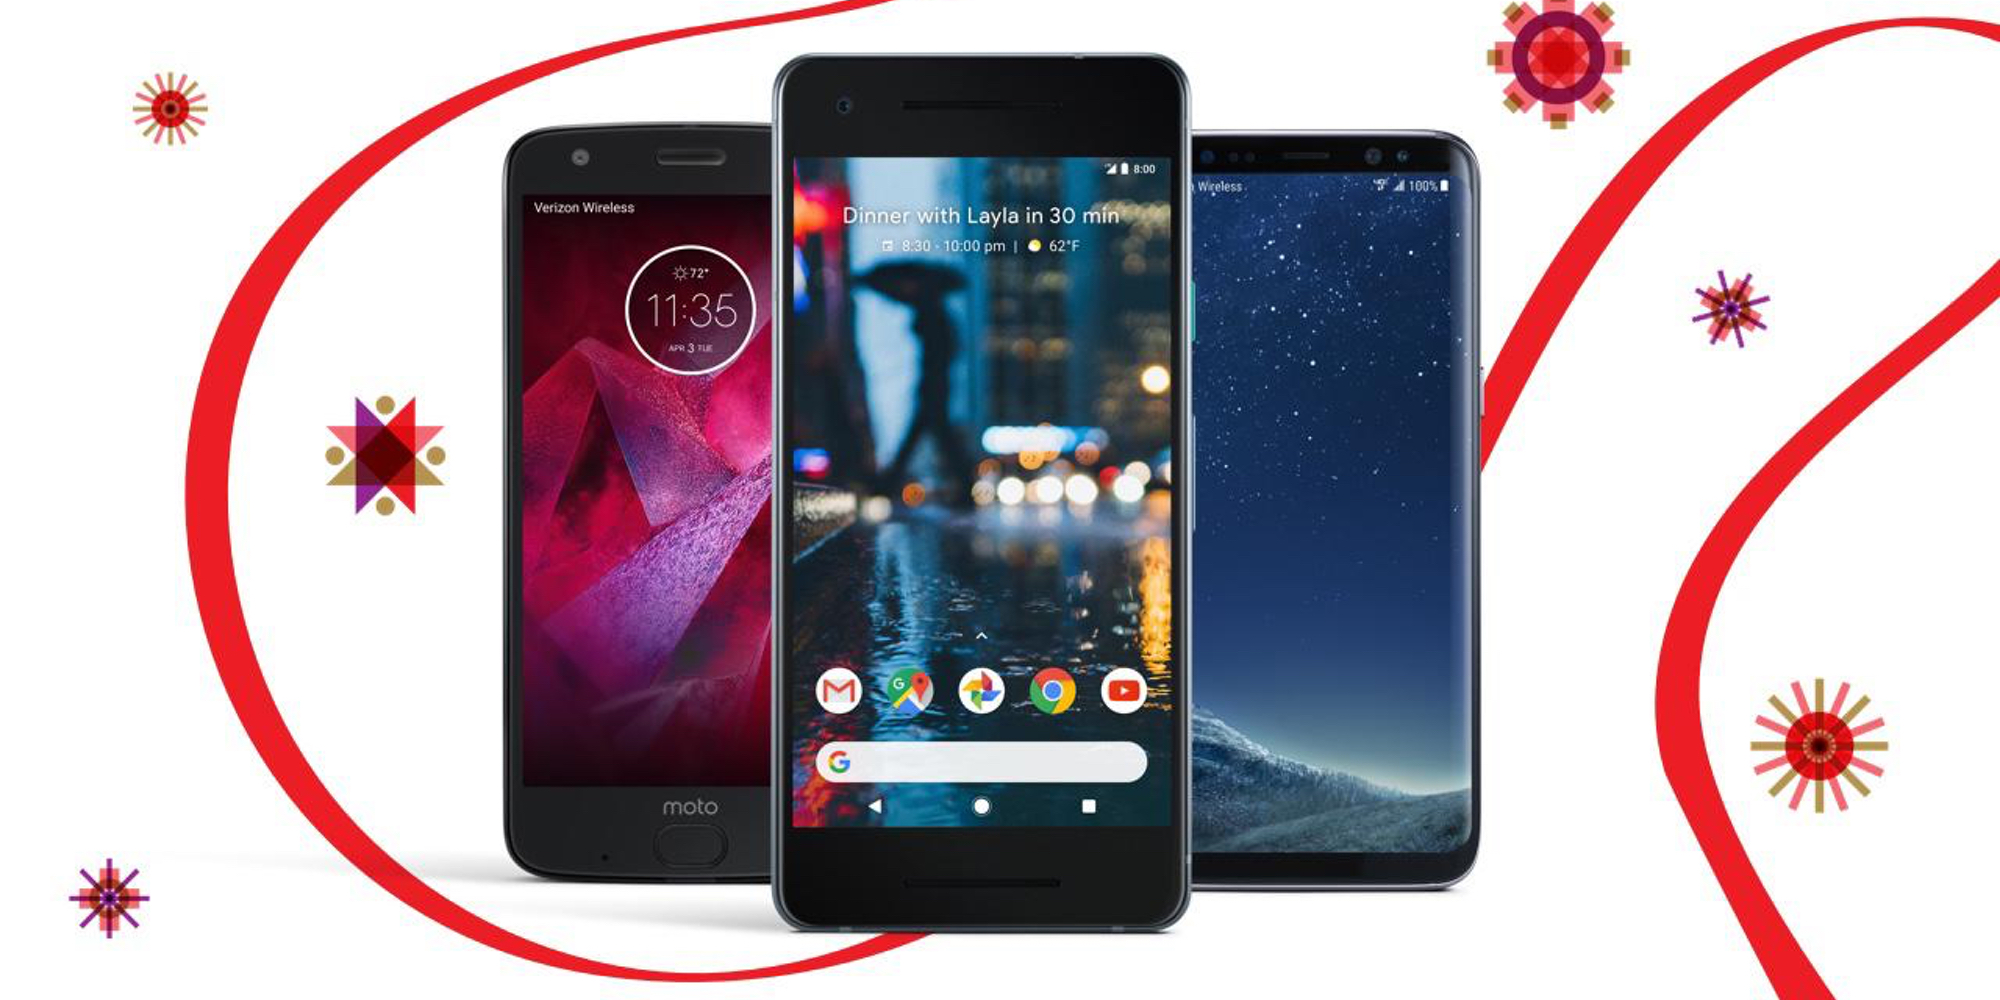 Verizon Black Friday 2018: 50% off phones, more - 9to5Toys